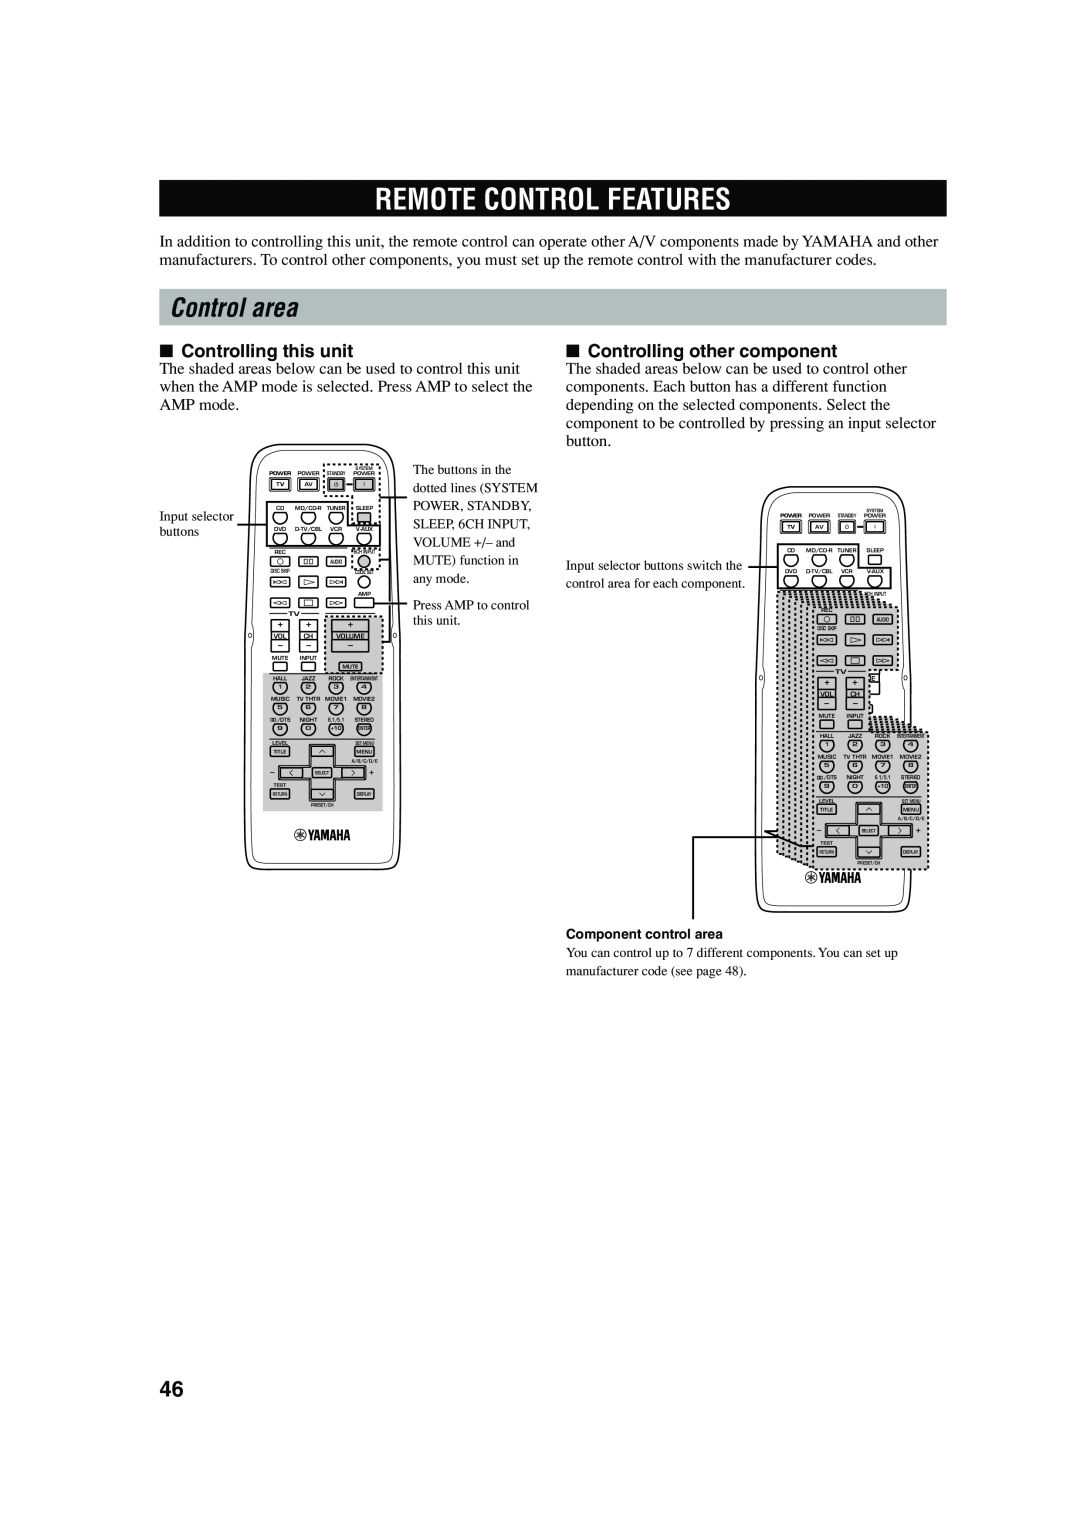 Yamaha RX-V440RDS owner manual Remote Control Features, Control area, Controlling this unit, Controlling other component 